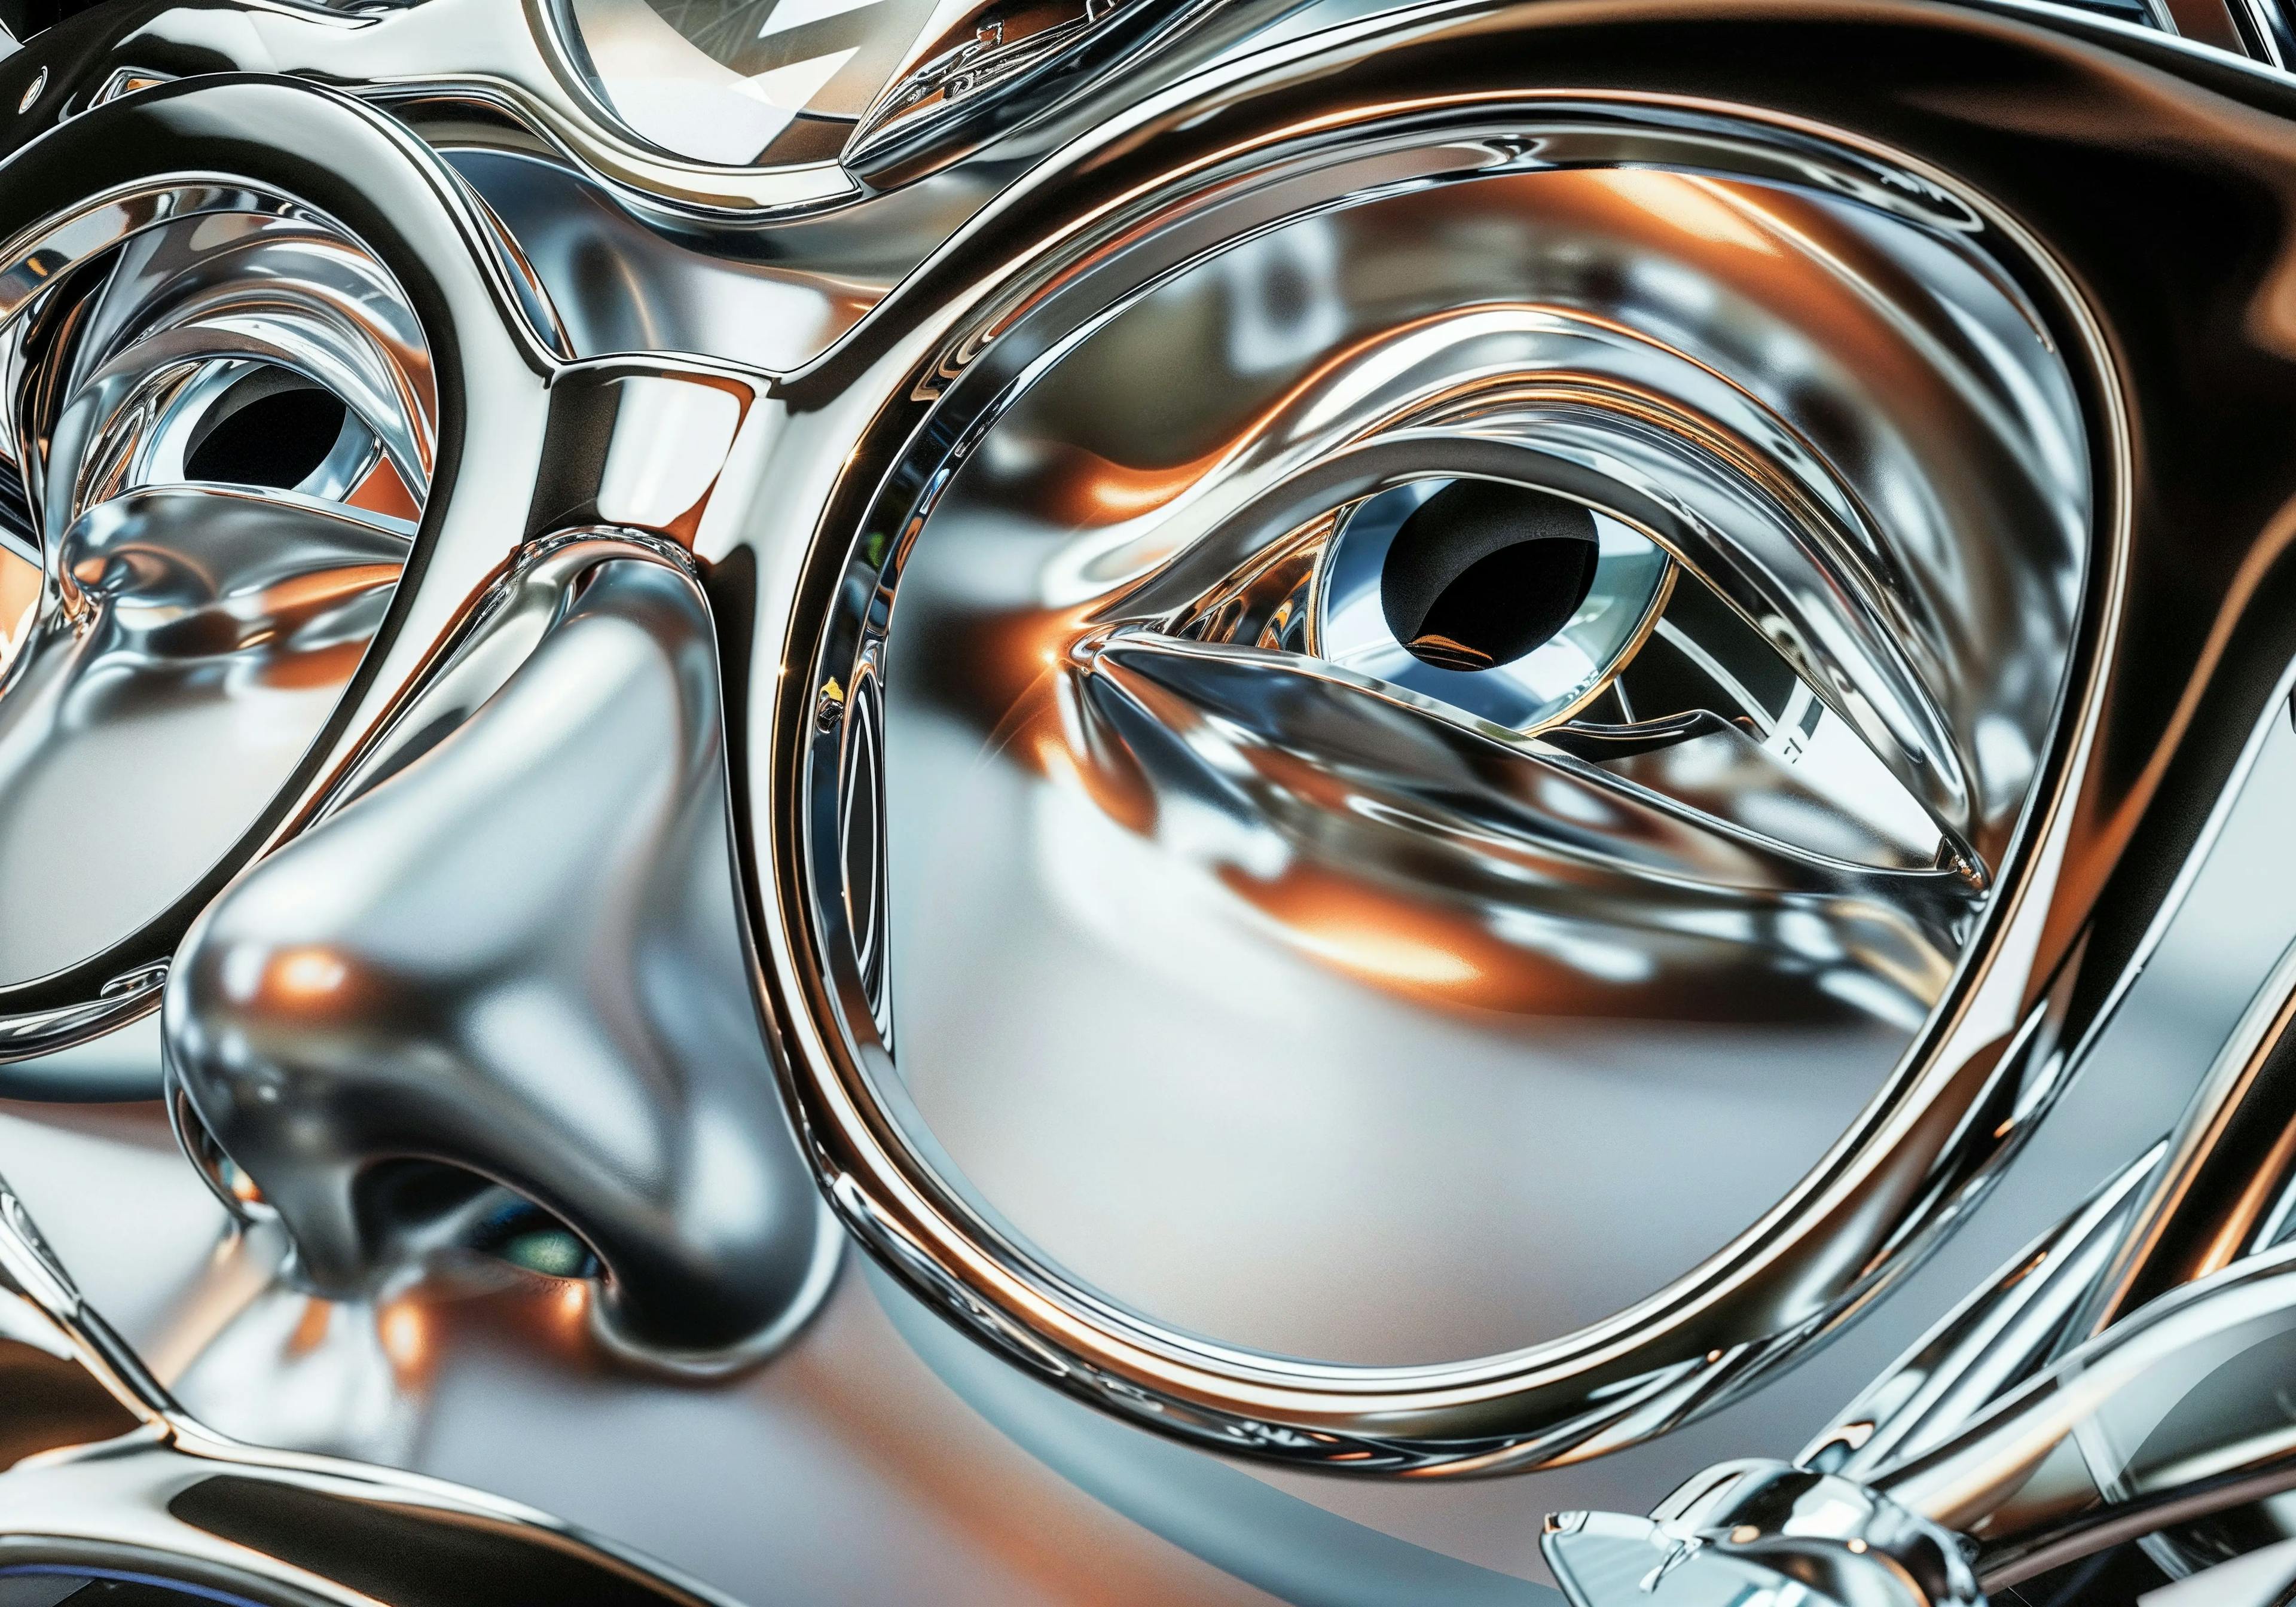 What appears to be a man covered in chrome looking through a pair of luxury glasses